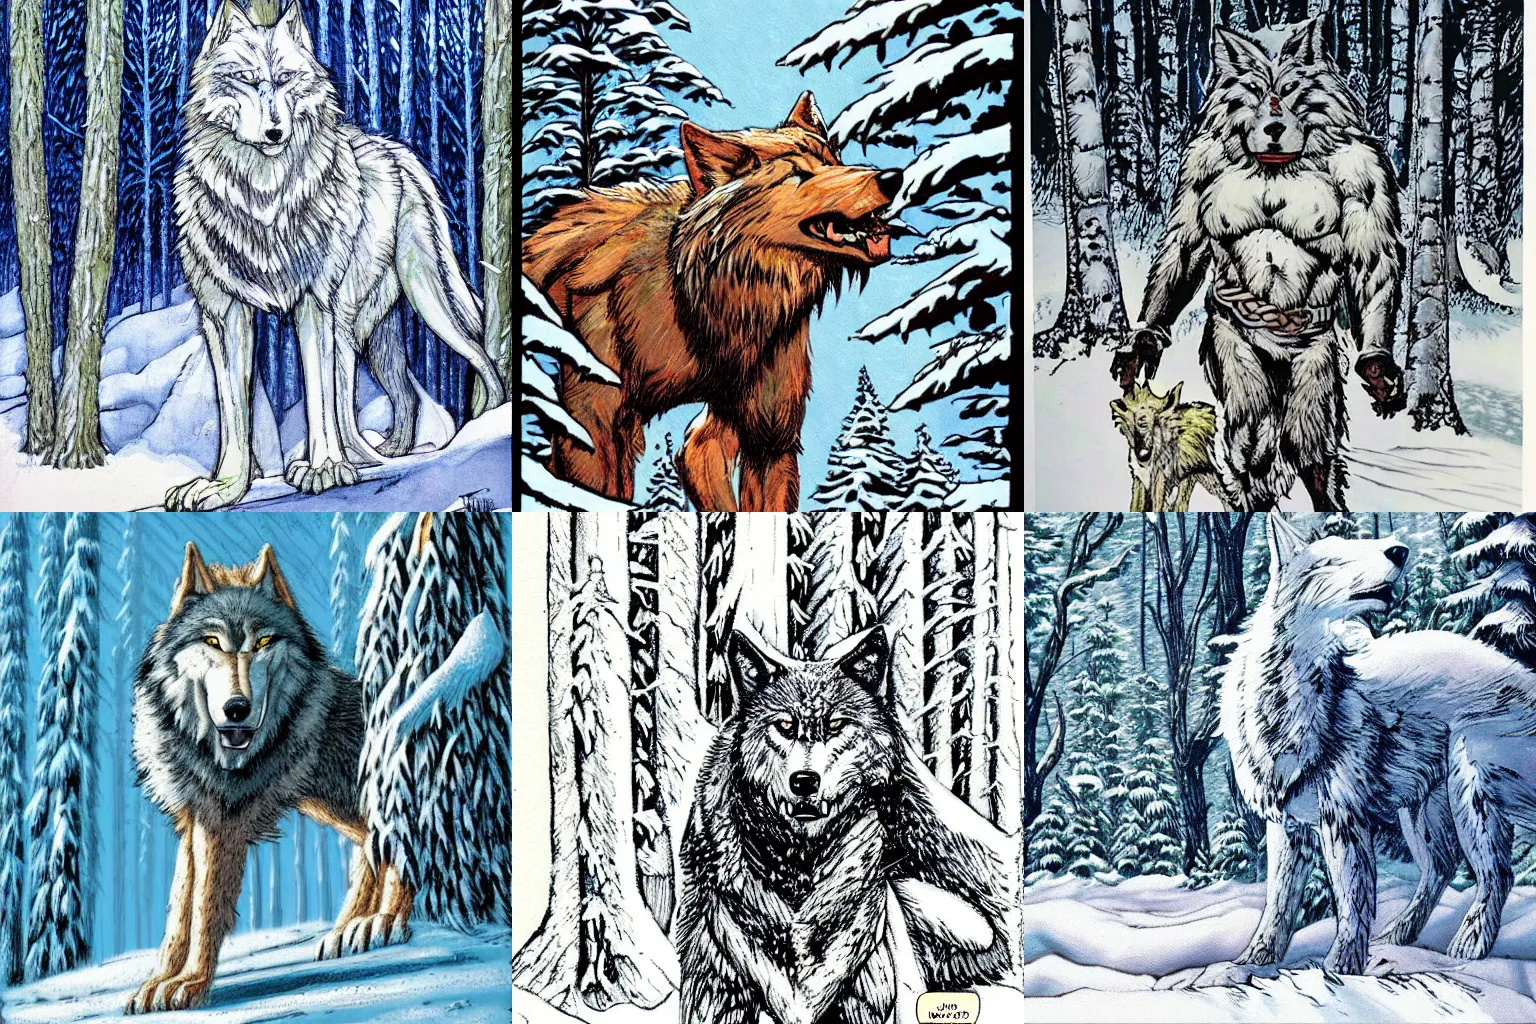 Prompt: giant wolf life beast in a snowy forest, art by todd mcfarlane.